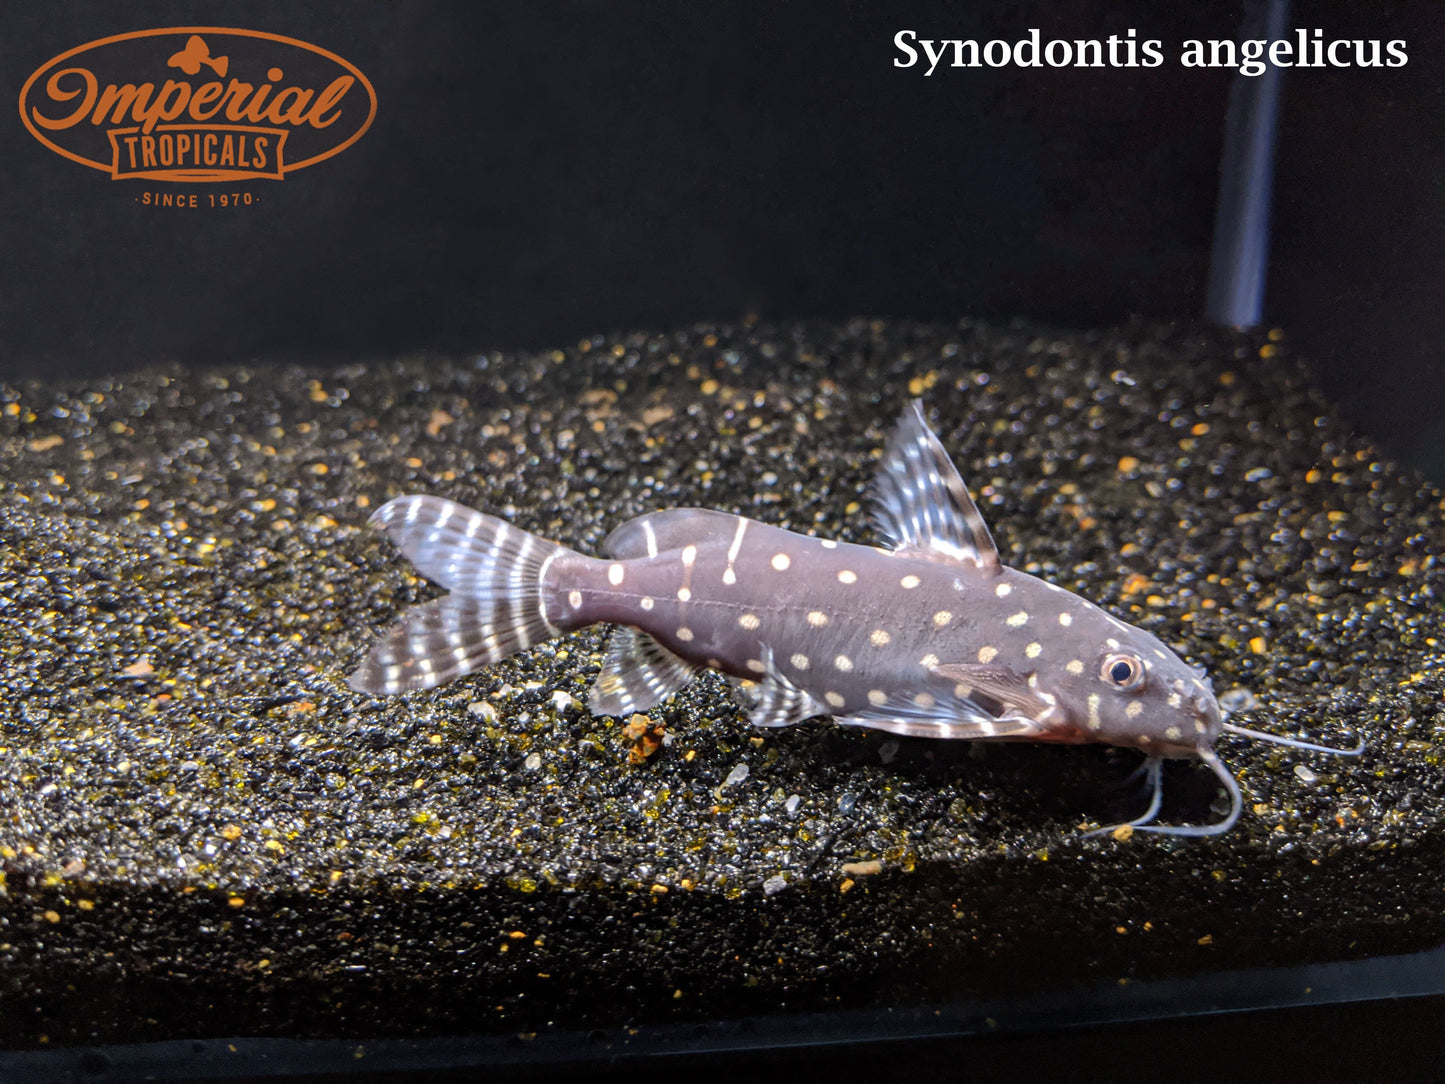 Polka Dot Squeaker Cat (Synodontis angelicus) - Imperial Tropicals